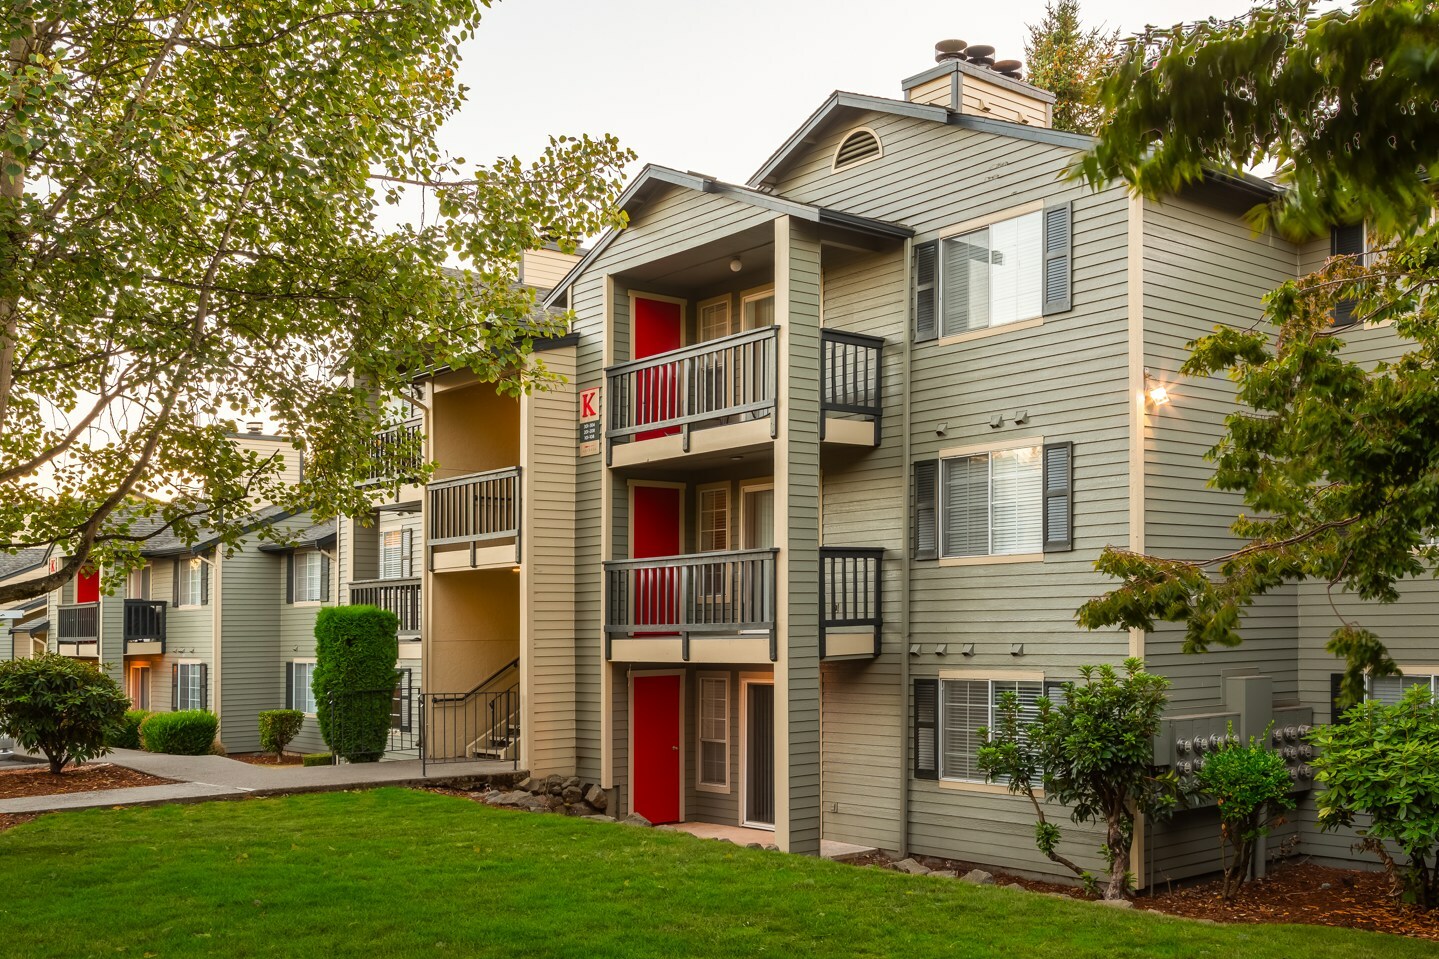 MG Properties Completes Acquisition of 192-Unit Artesia Apartment Community in Silver Lake Neighborhood of Everett for $61.6 Million